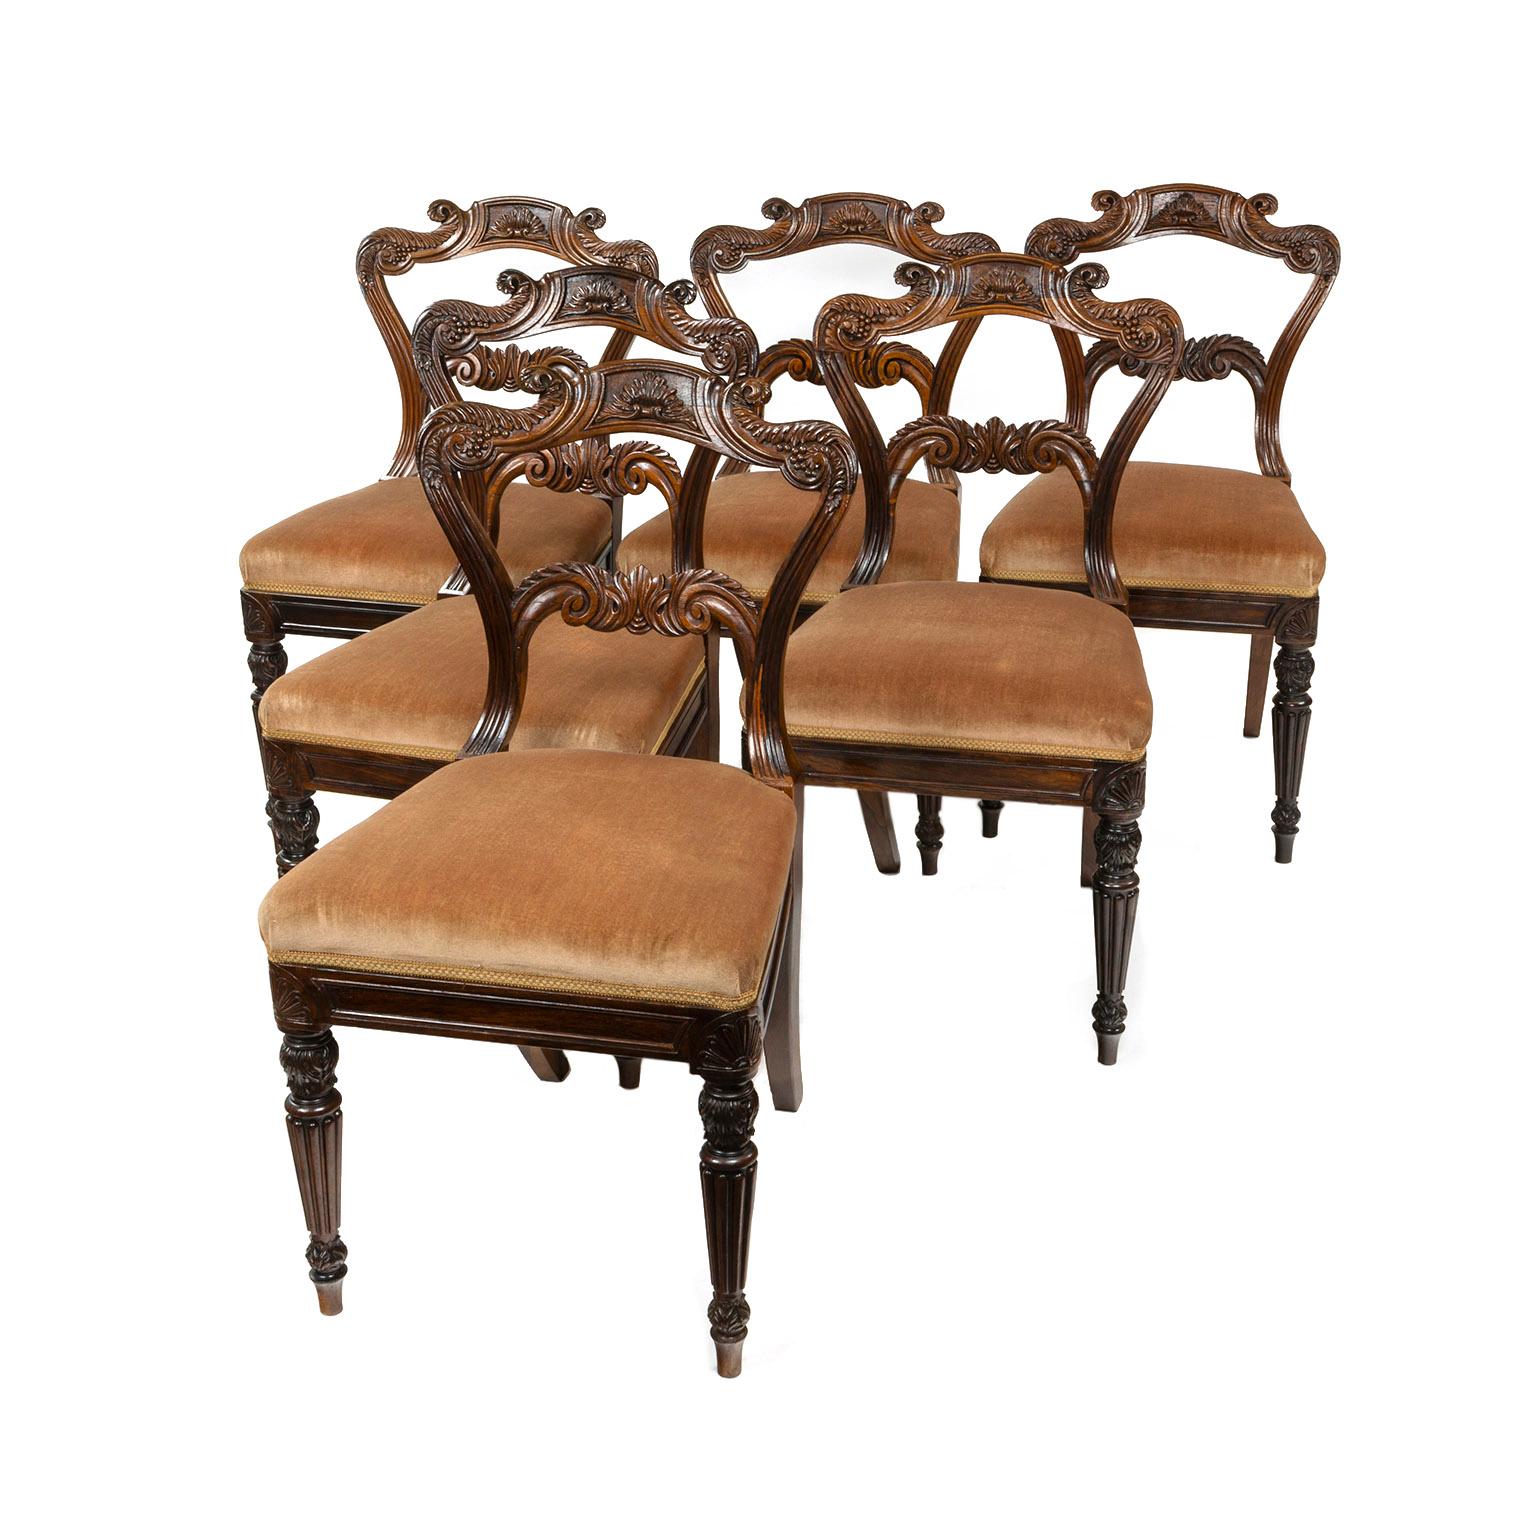 This set of chairs are by one of England's best cabinet makers, Gillows of Lancaster and London, this set of chairs is of quality with carving to the top of the front chair legs, the back and top rails.

Gillows of Lancaster and London, also known